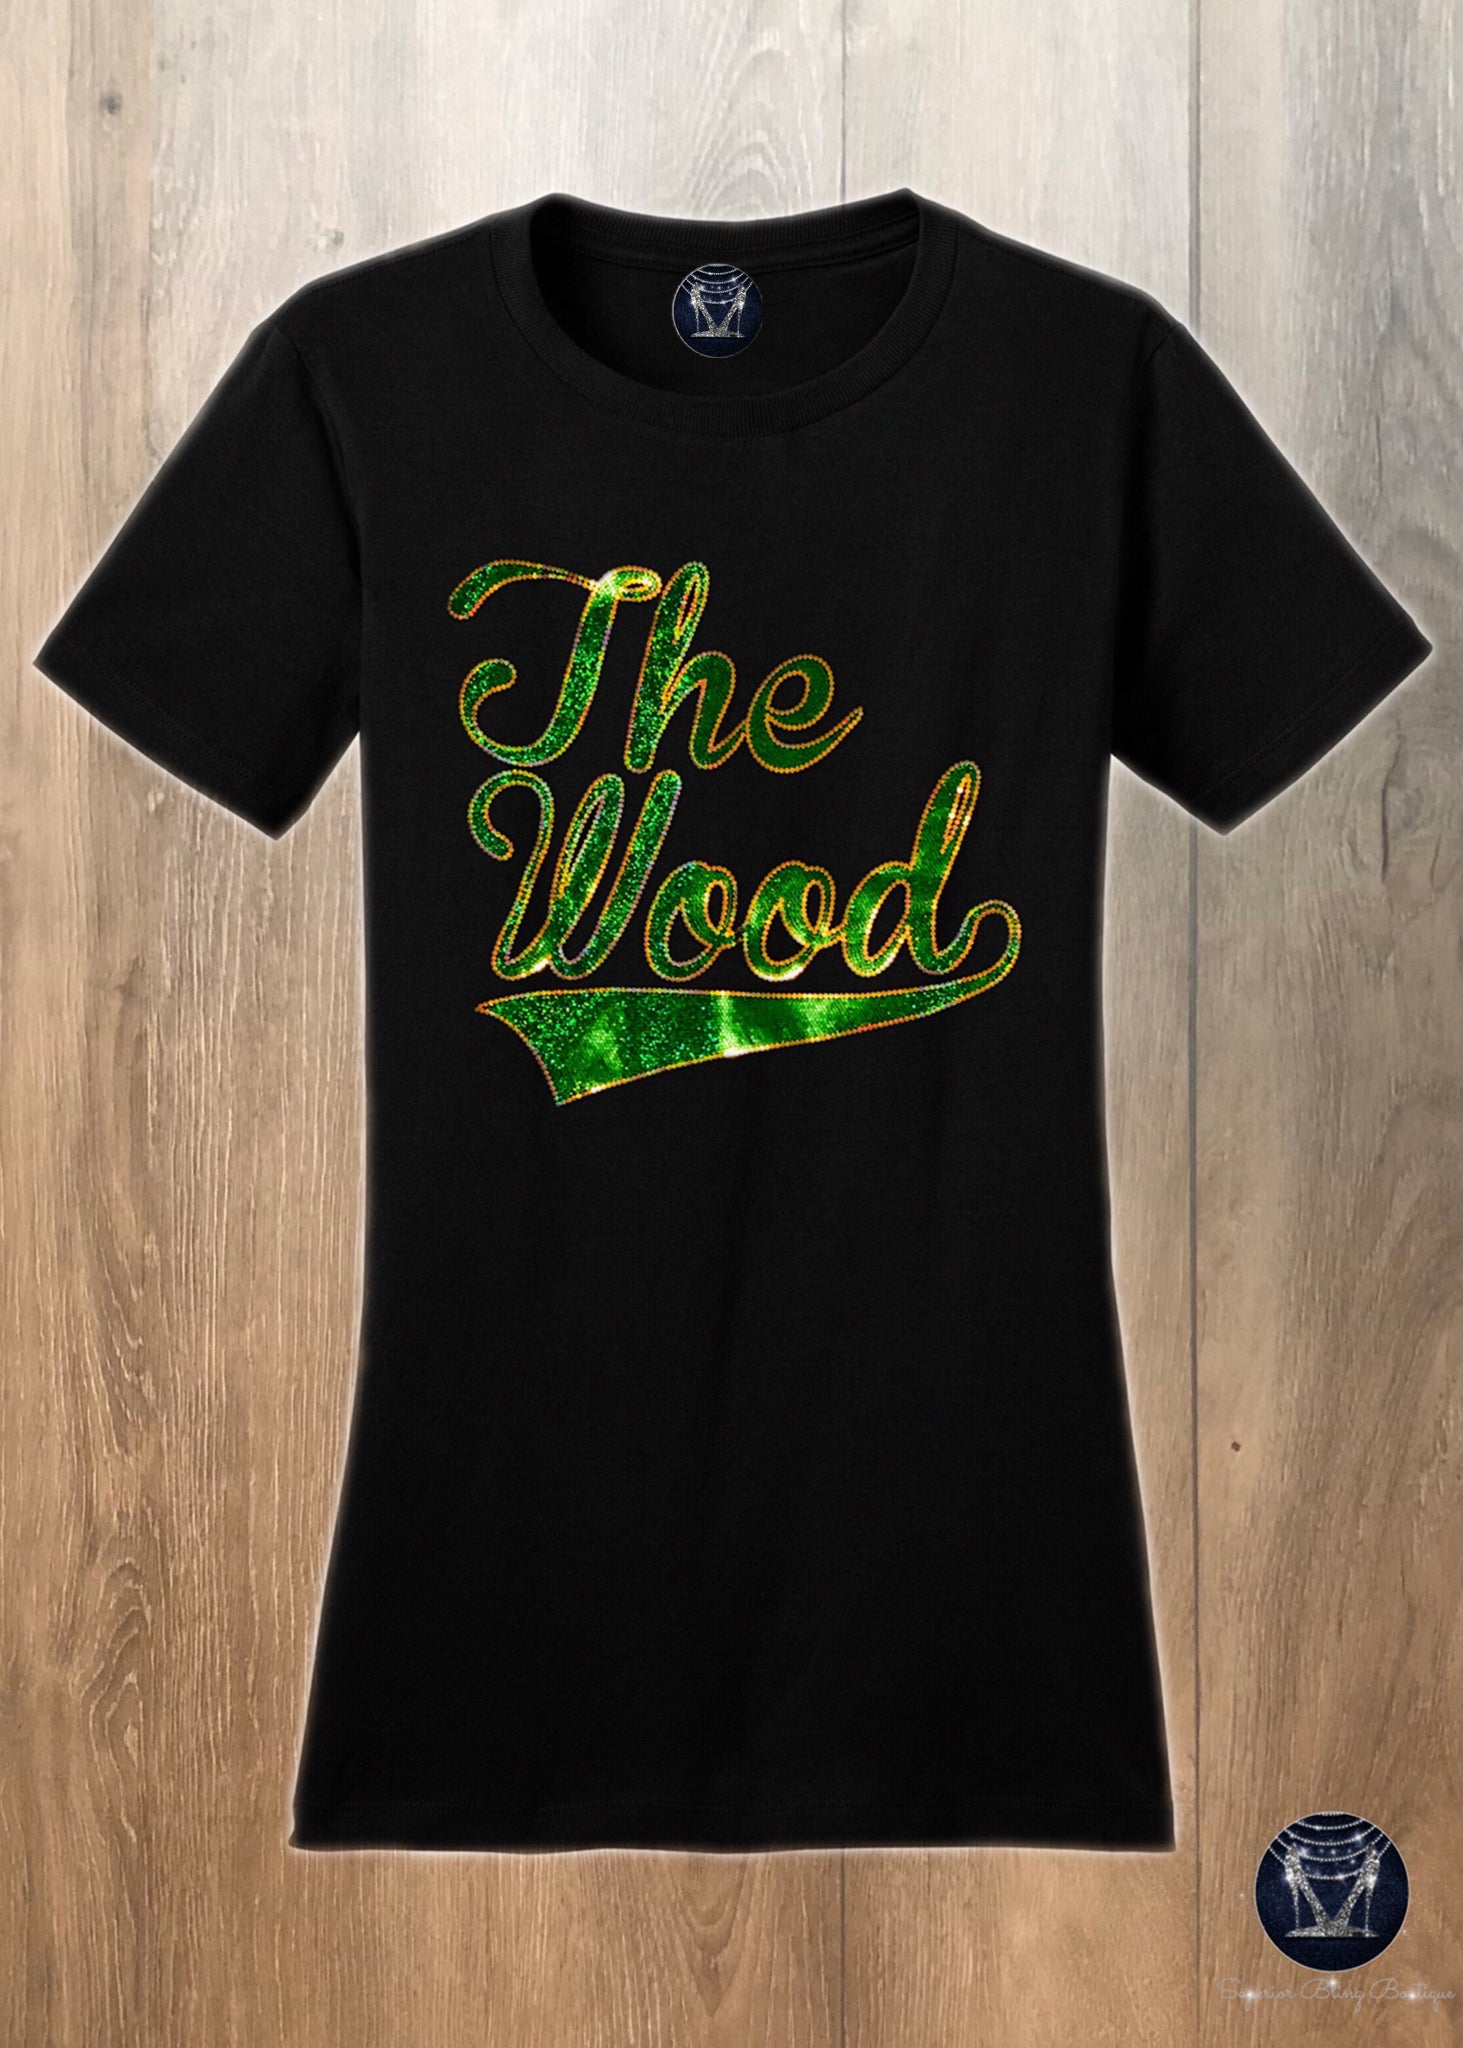 WHS "THE WOOD" Bling Shirt